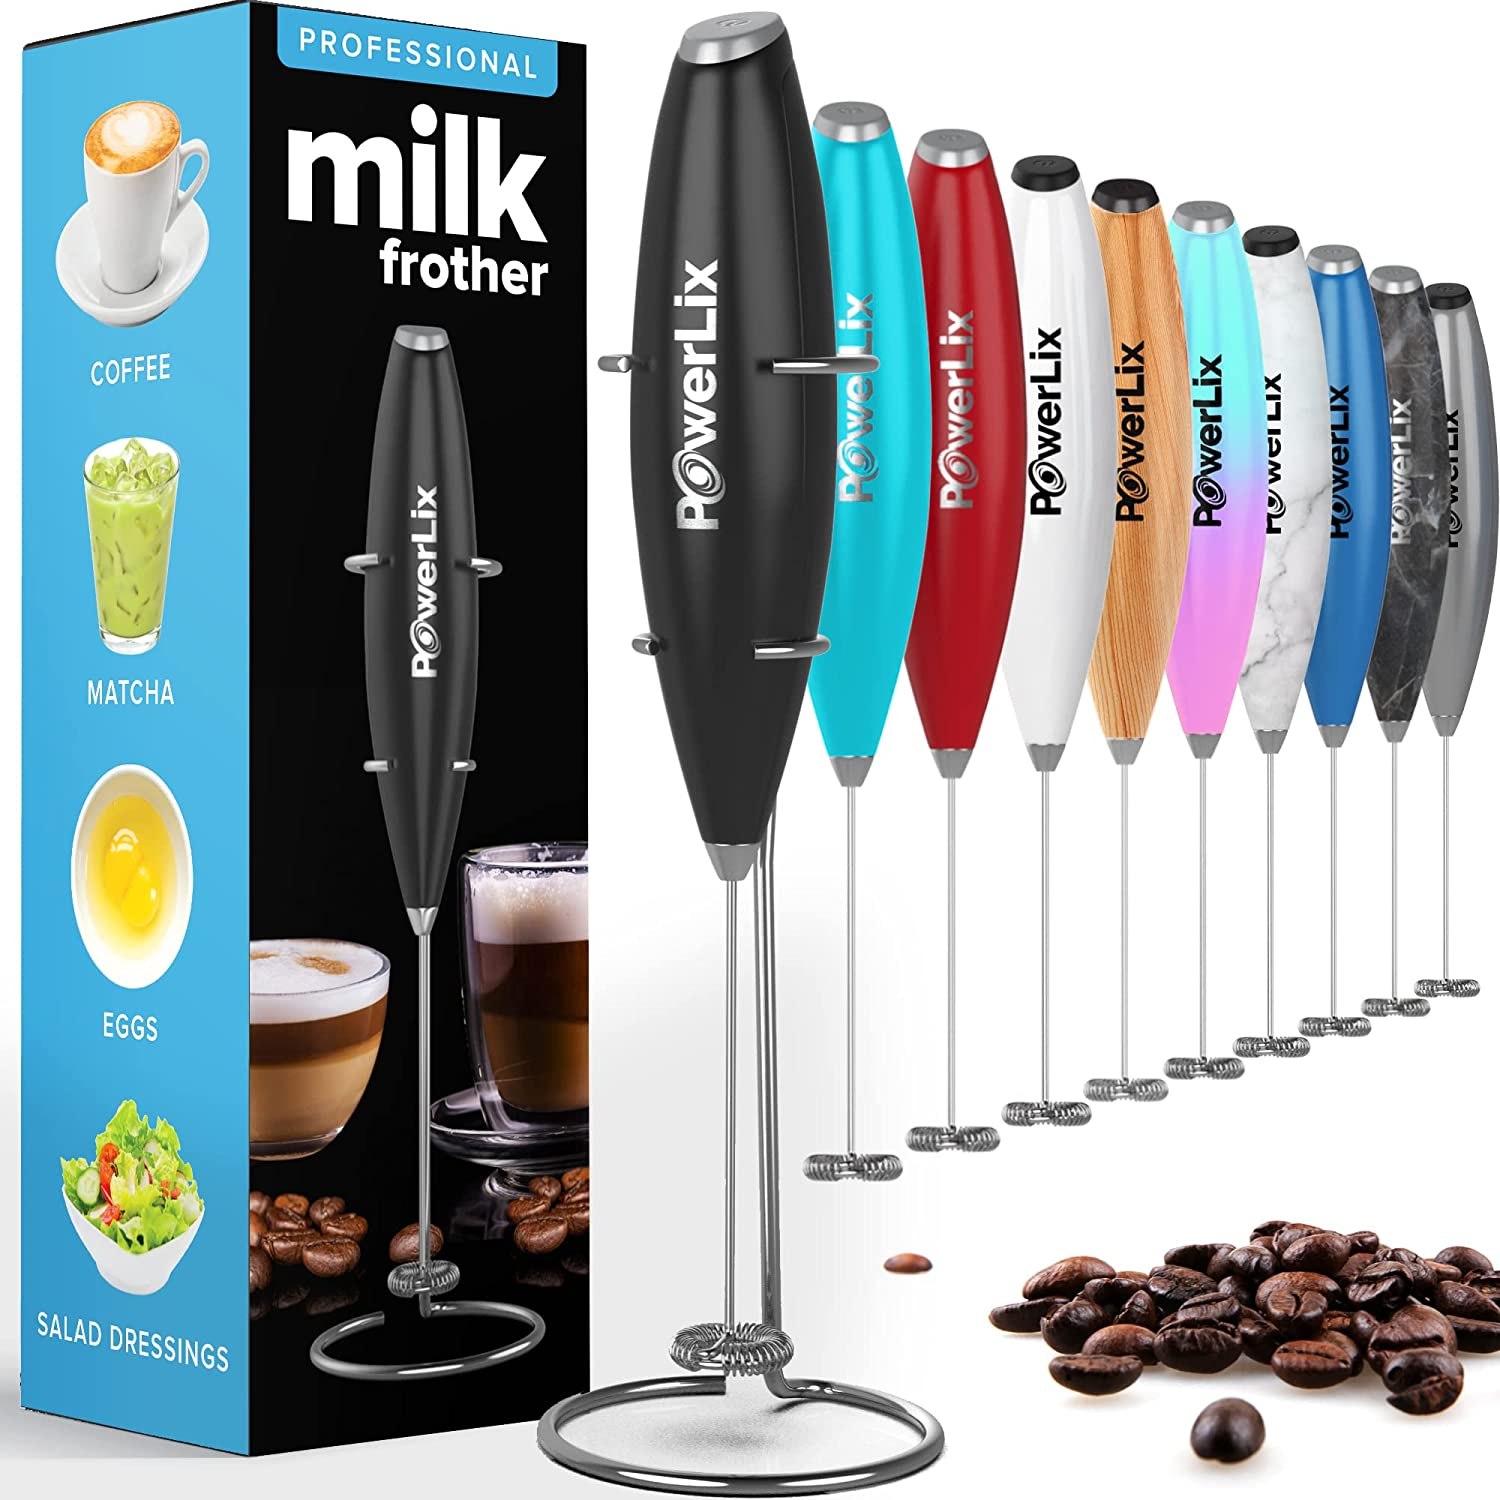 The 10 Best High Speed Milk Frothers of 2023 (Reviews) - FindThisBest